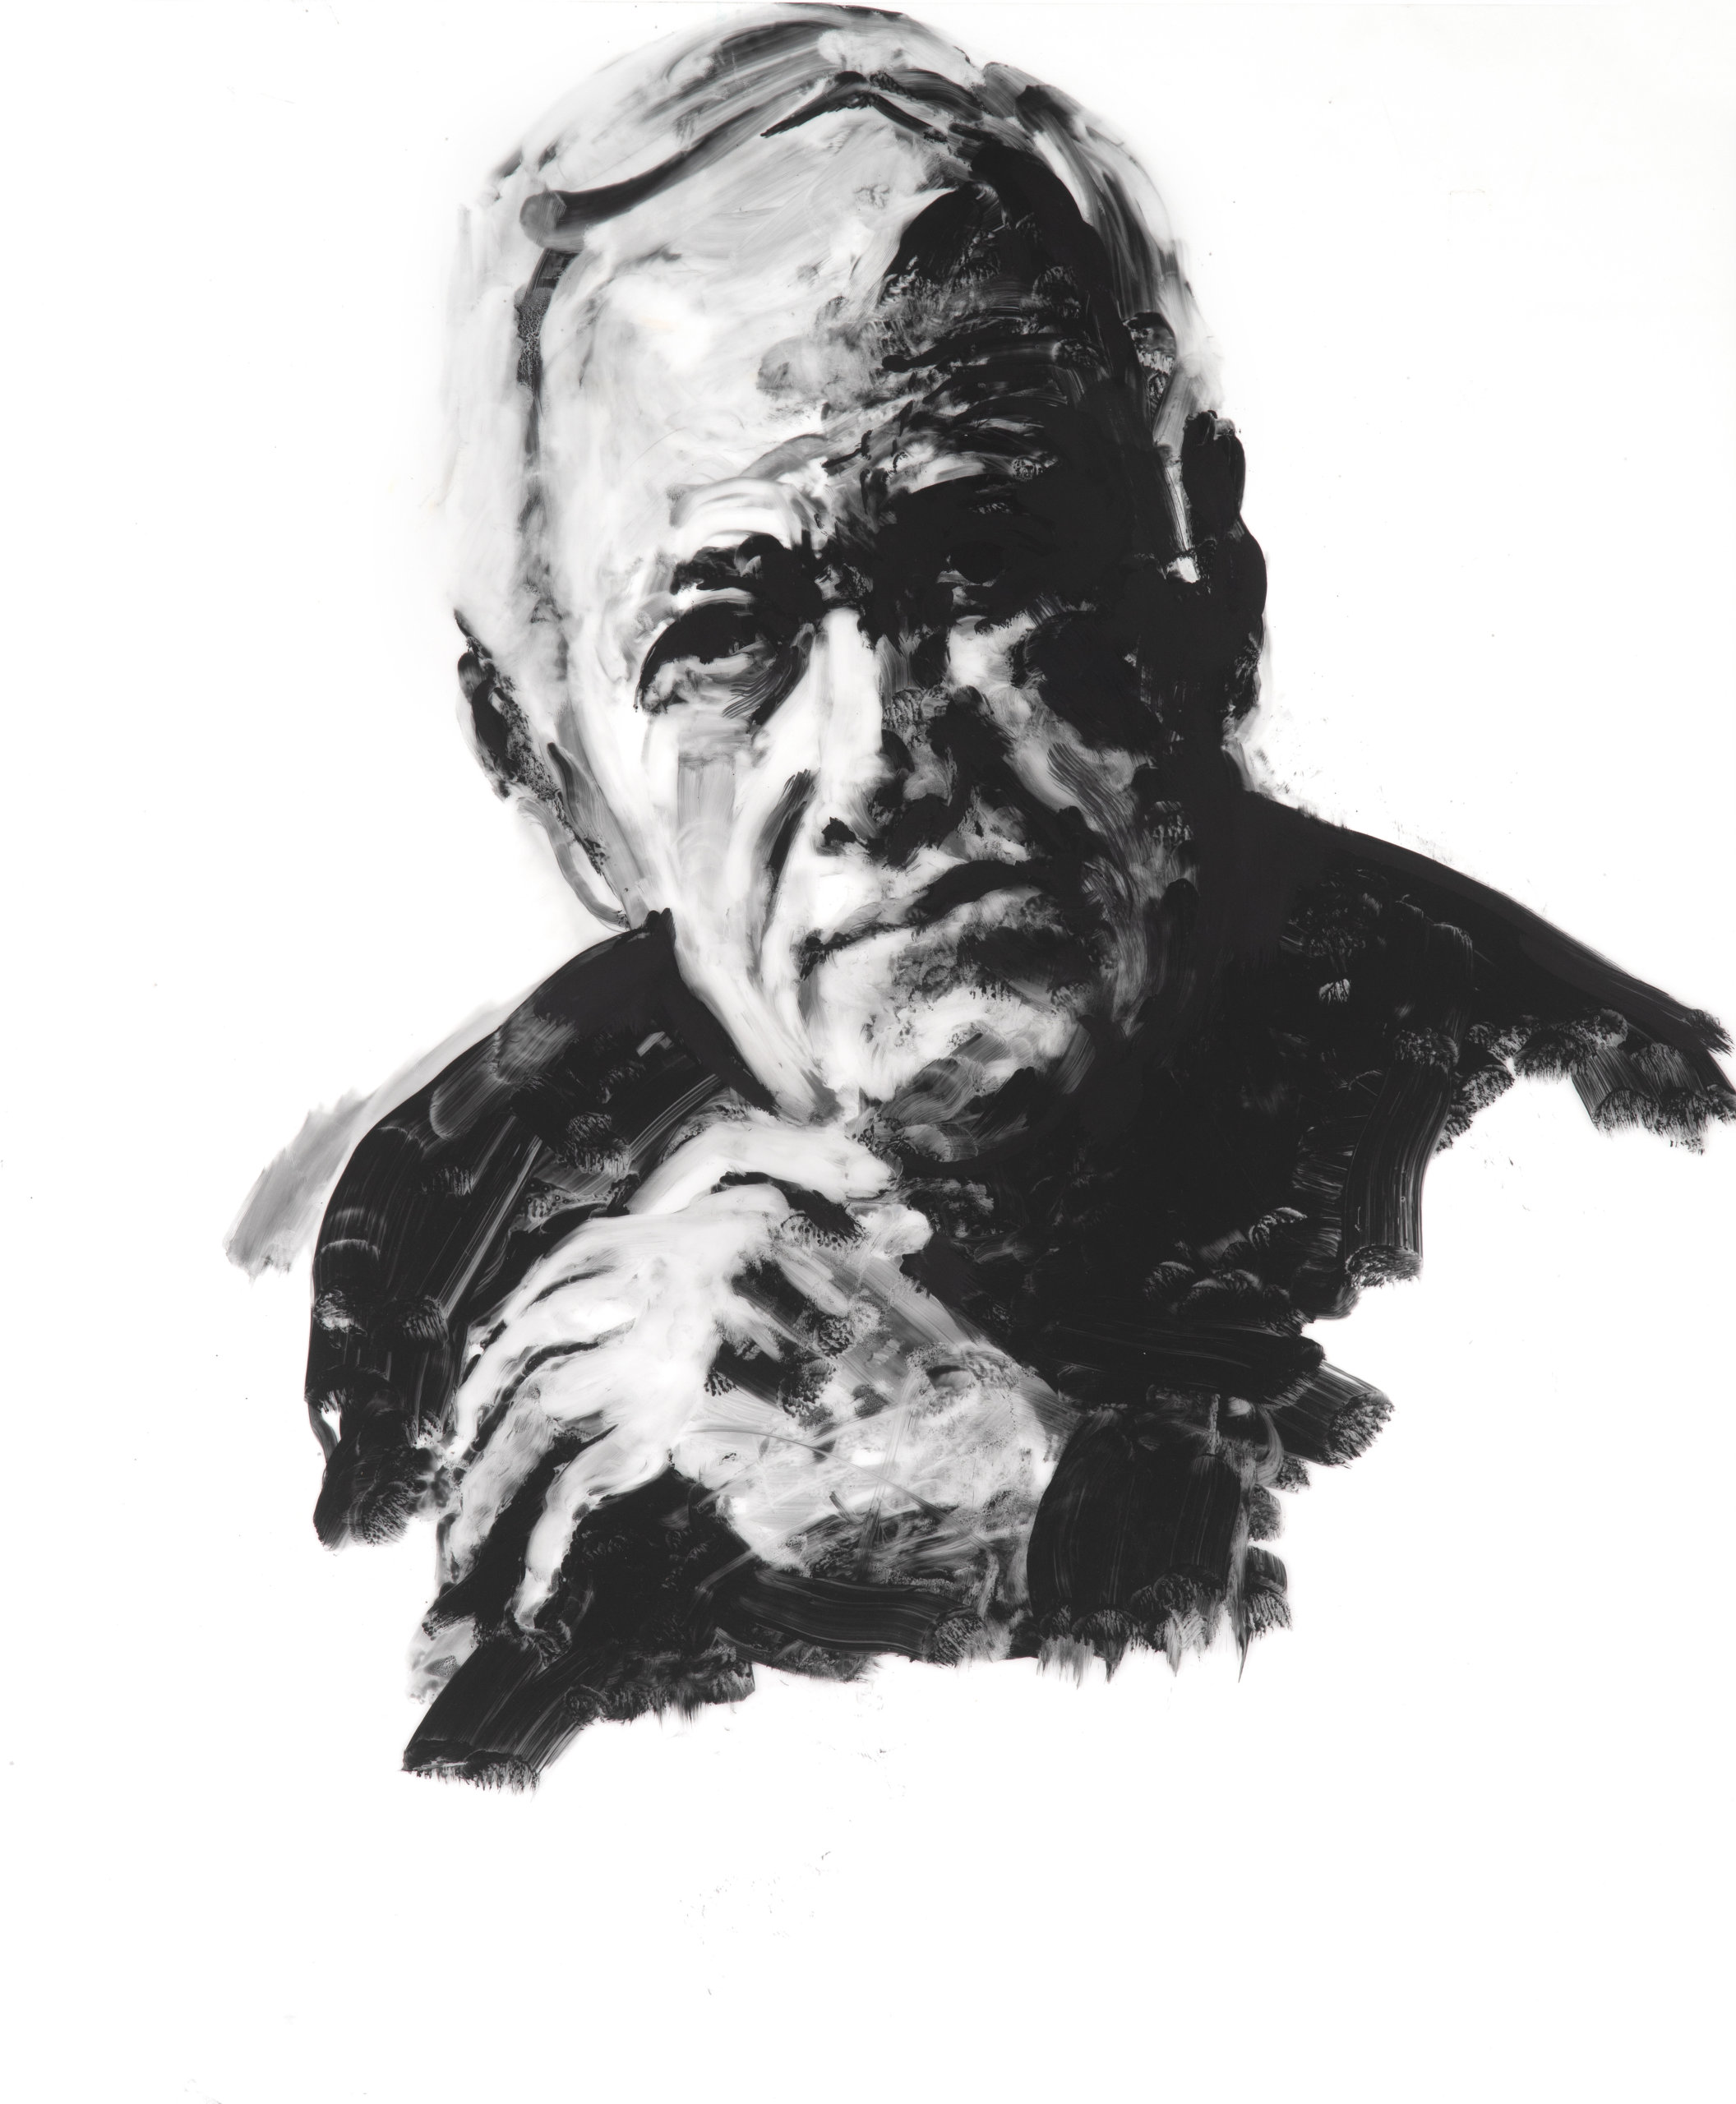 Saints of Sag Harbor James Salter painting by Eric Fischl